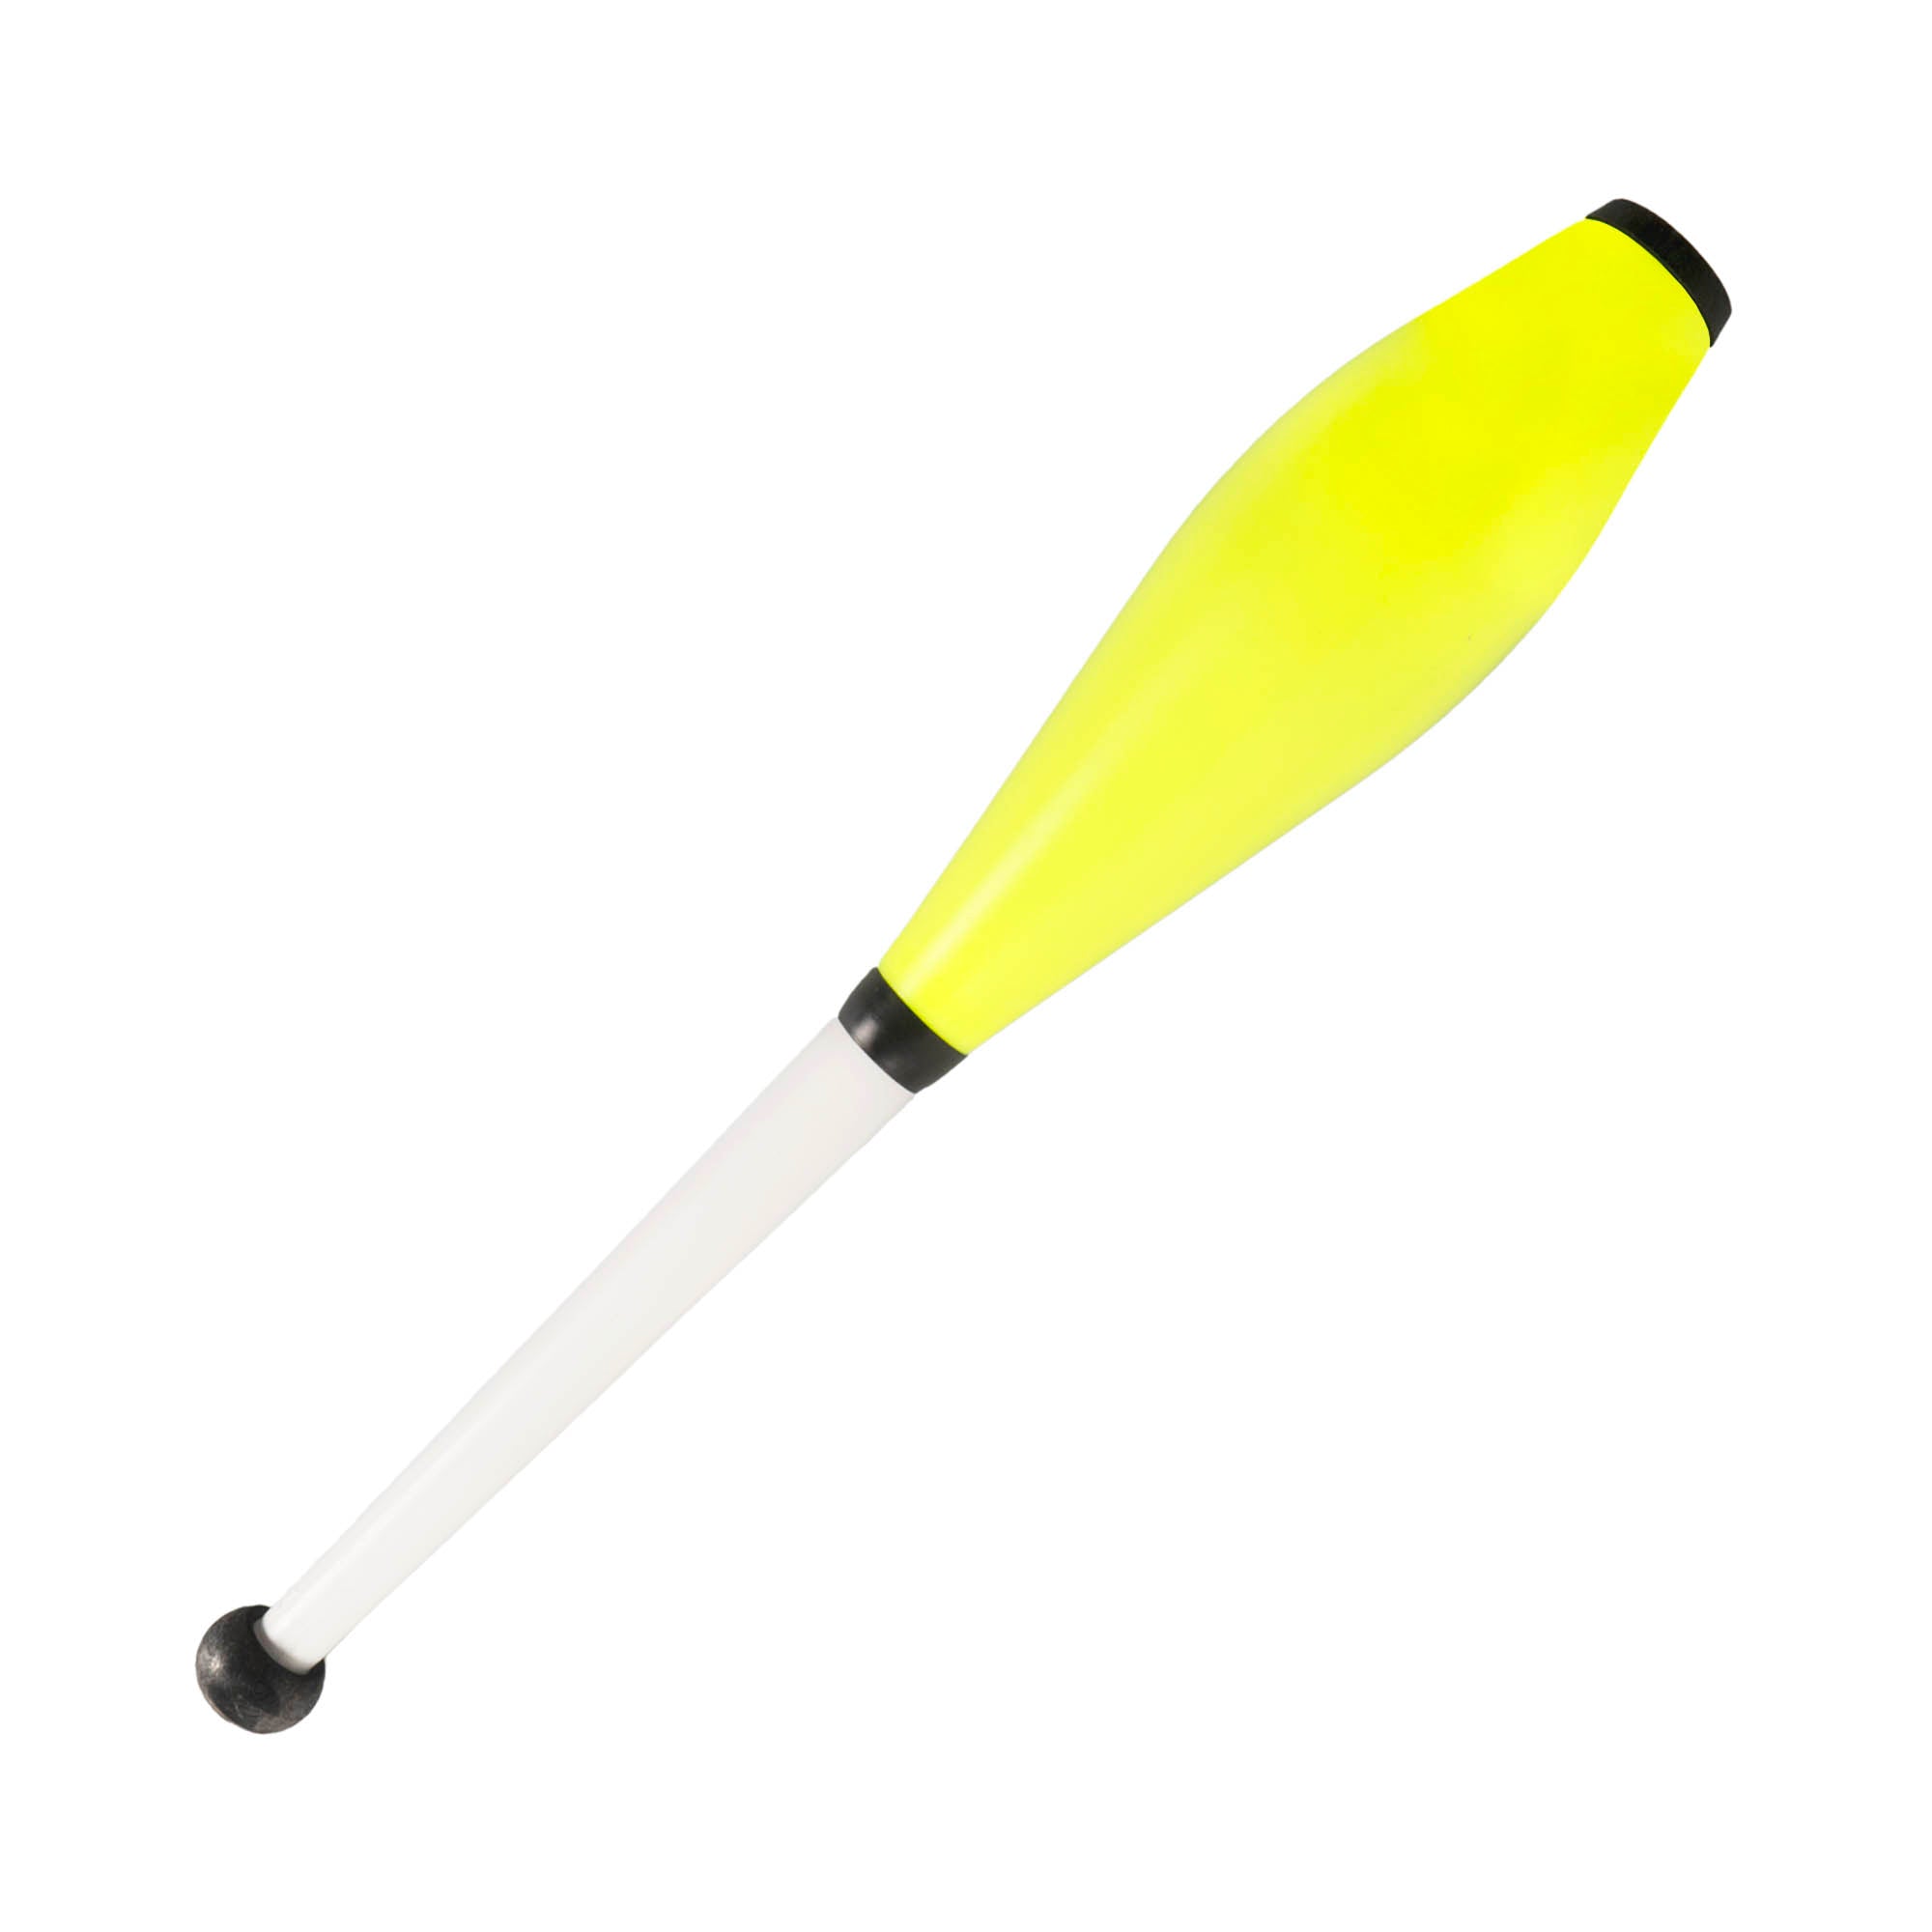 Play PX3 - bright yellow